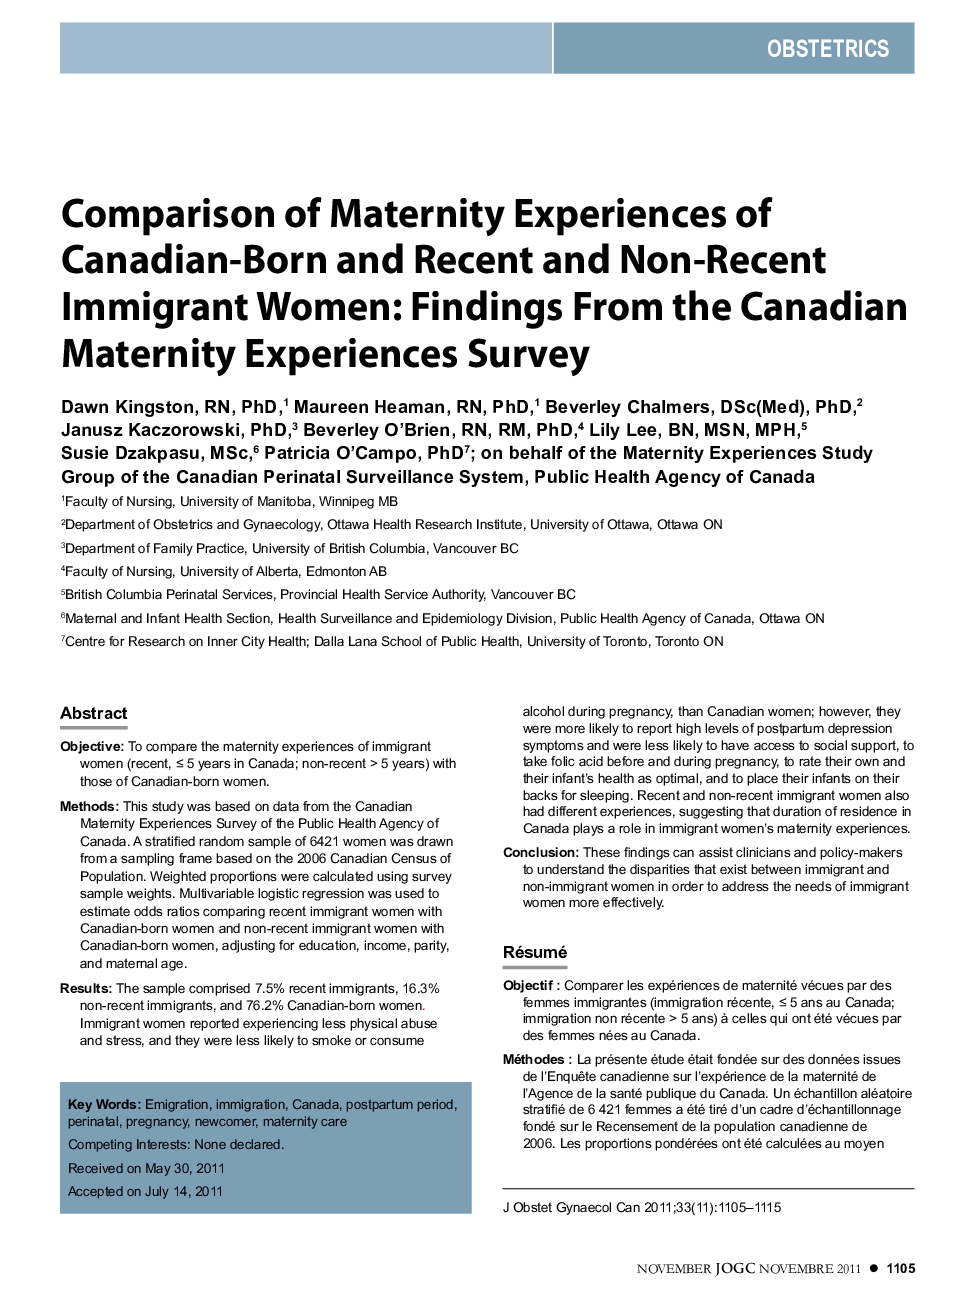 Comparison of Maternity Experiences of Canadian-Born and Recent and Non-Recent Immigrant Women: Findings From the Canadian Maternity Experiences Survey